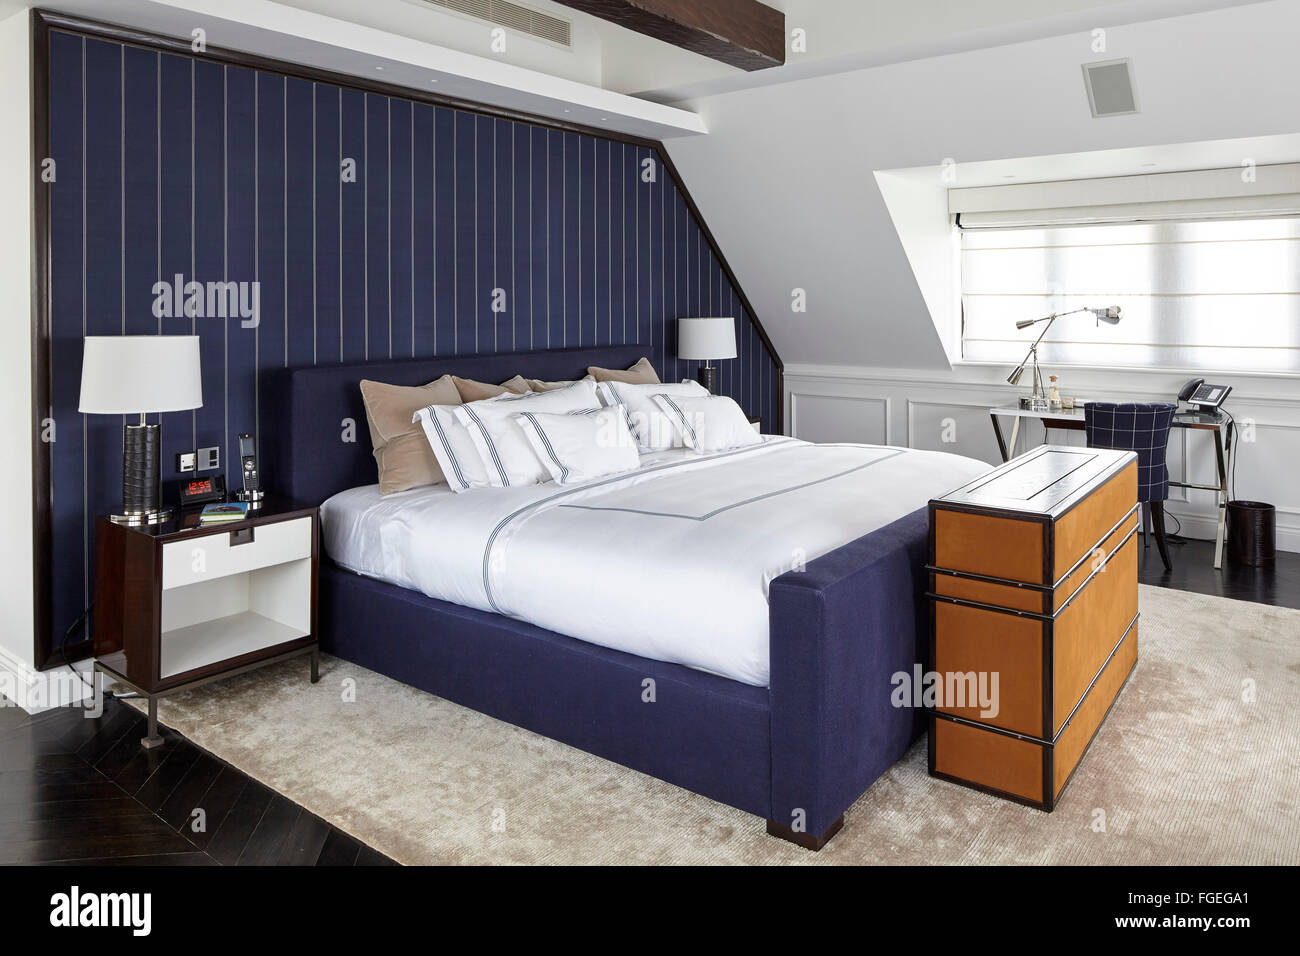 Master Bedroom With Dark Blue Pinstripe Fabric Wall Covering With